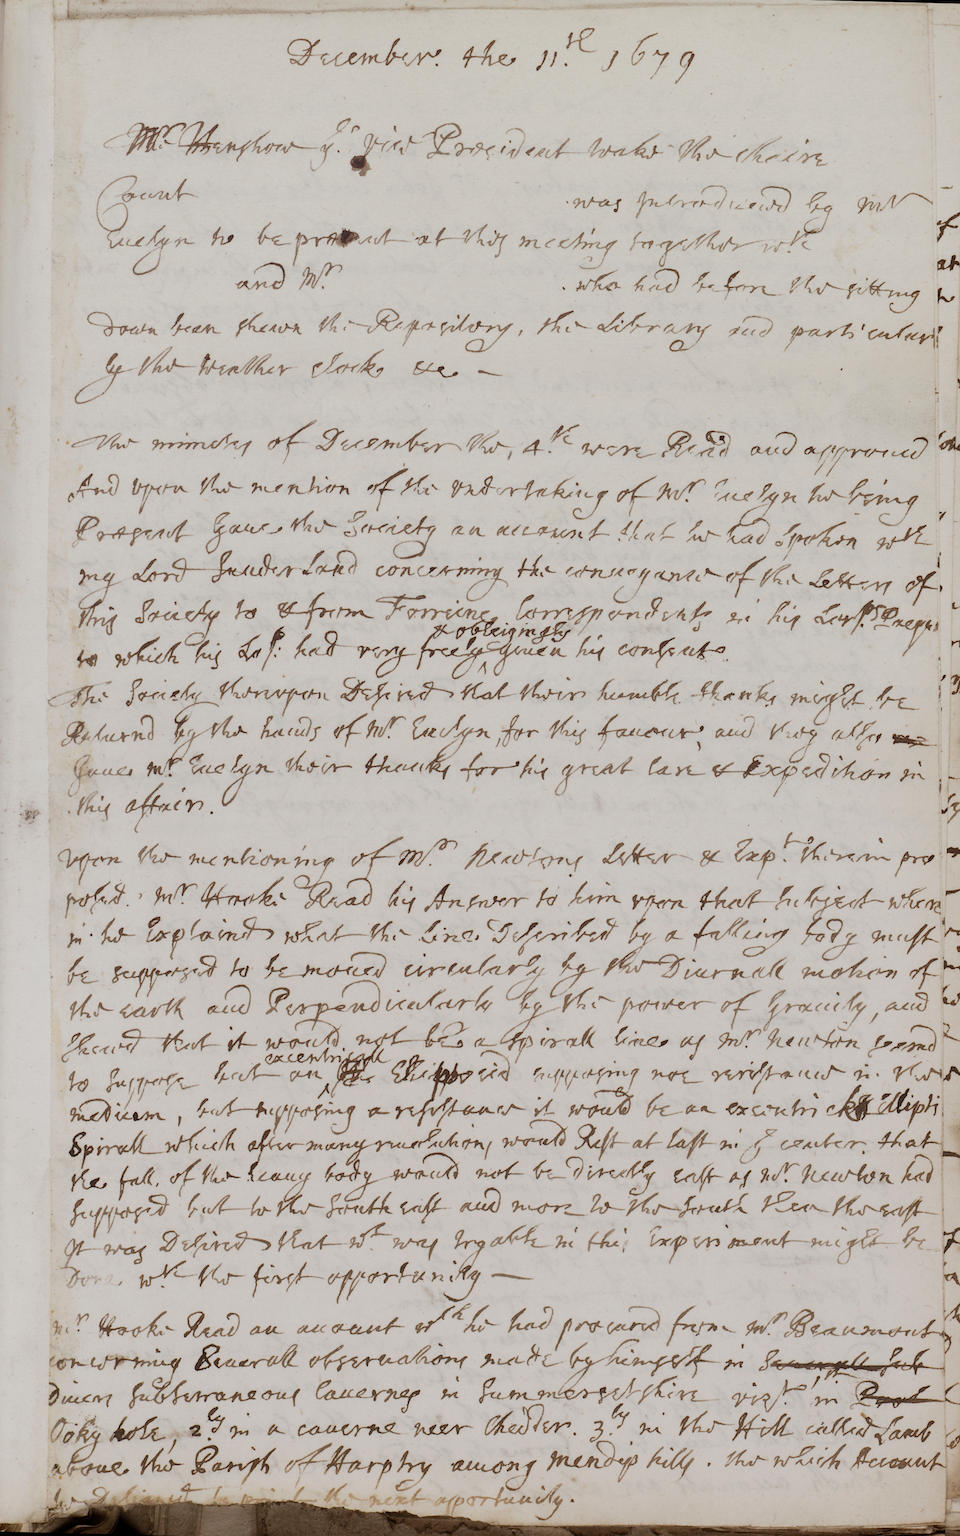 Folder of manuscripts - notes relating to lectures at the Royal Society 1670's